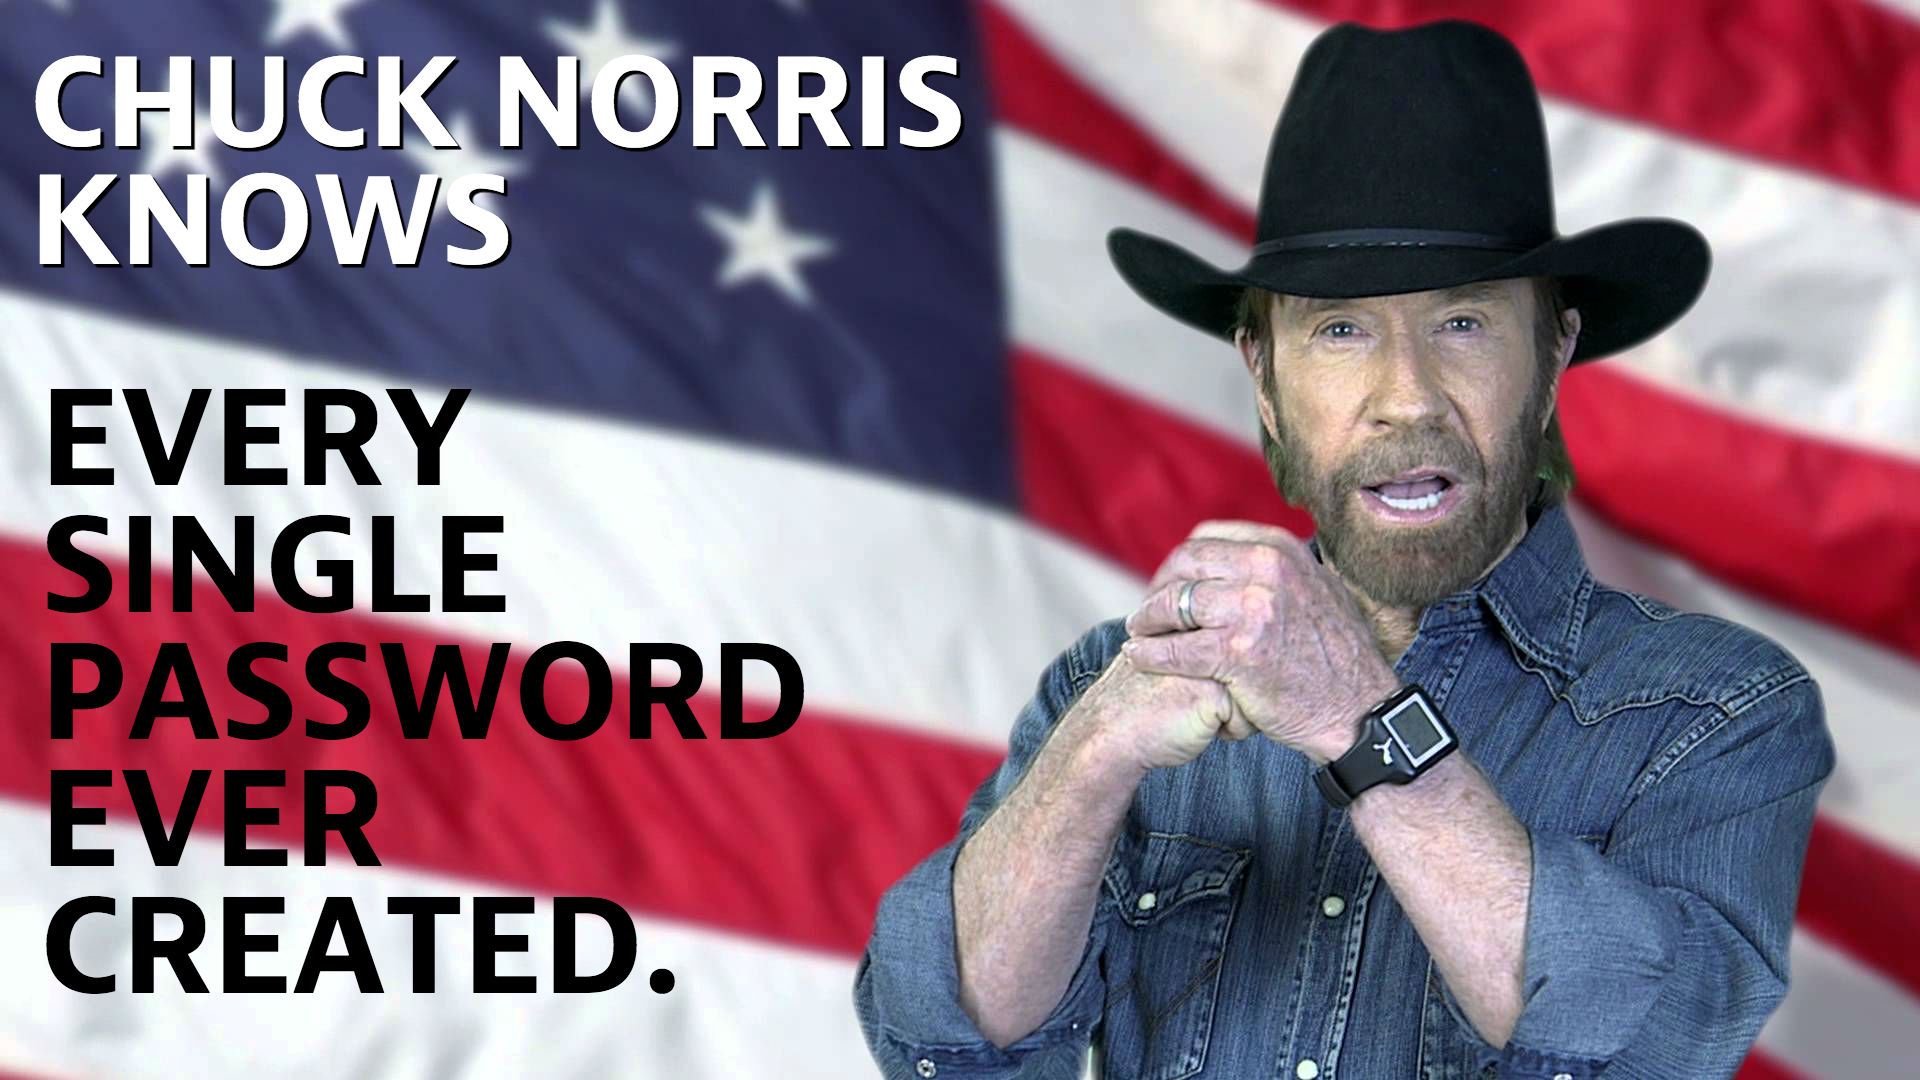 Chuck Norris knows every single password ever created